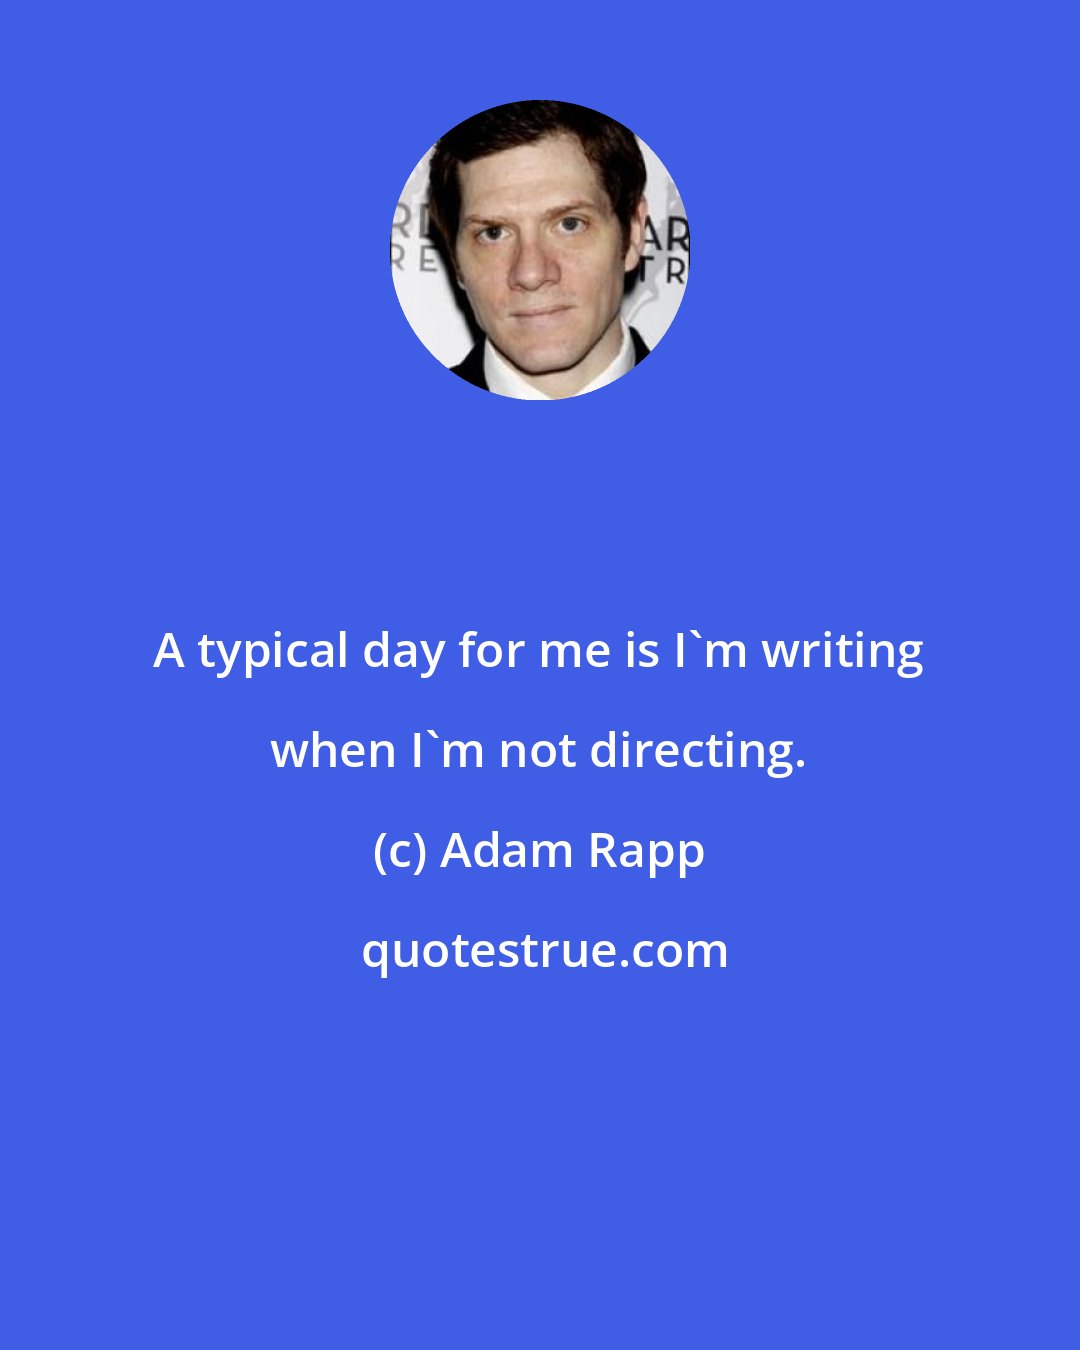 Adam Rapp: A typical day for me is I'm writing when I'm not directing.